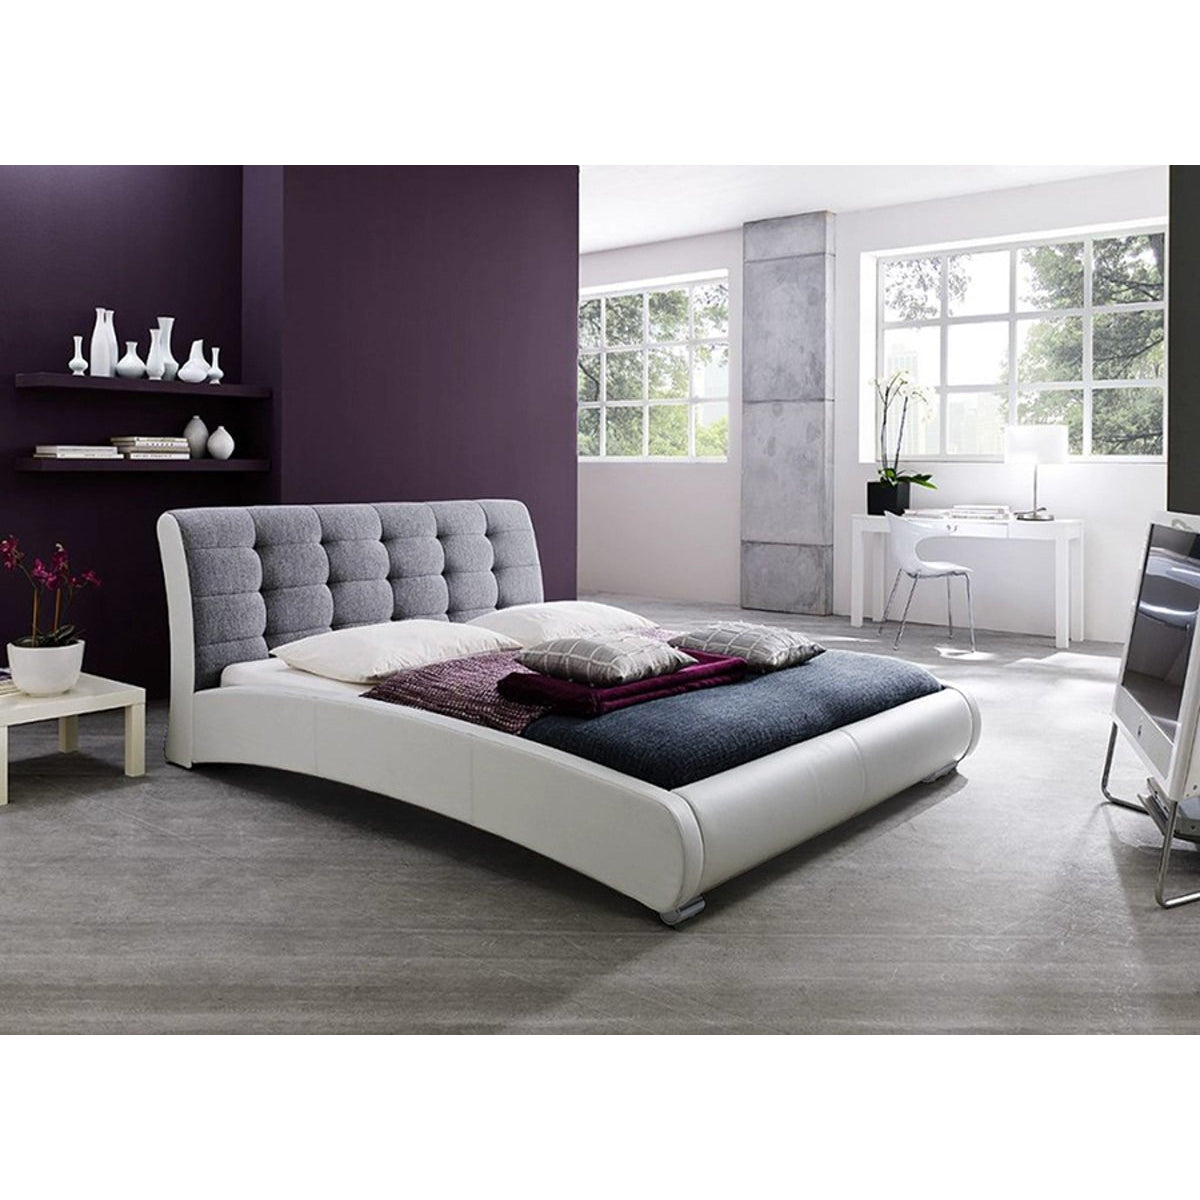 Baxton Studio Guerin Contemporary White Faux Leather Grey Fabric Two Tone Upholstered Grid Tufted King-Size Platform Bed Baxton Studio-King Headboard-Minimal And Modern - 4